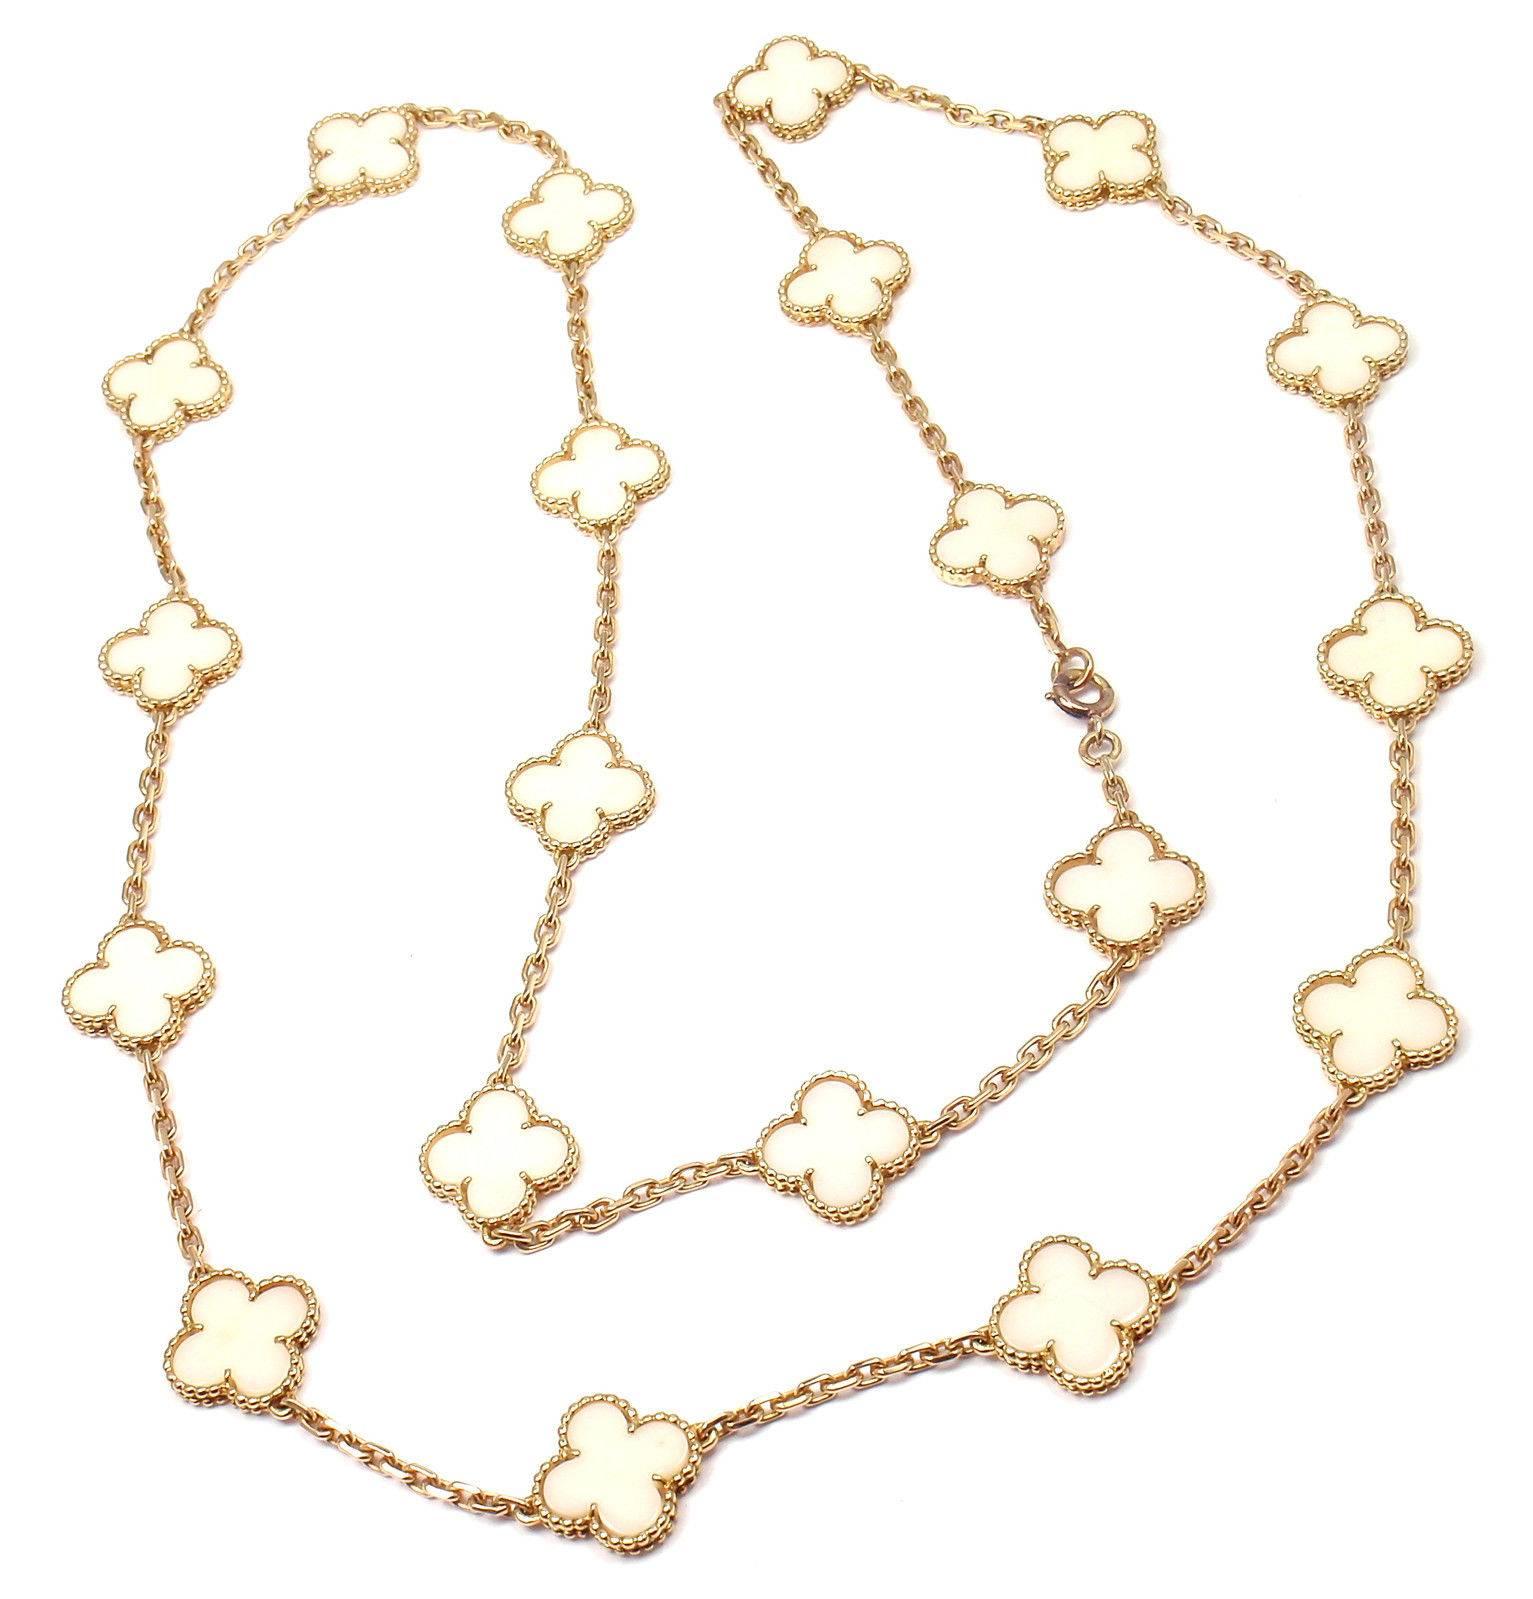 Van Cleef & Arpels Vintage White Coral 20 Motifs Alhambra Yellow Gold Necklace. 
With 20 motifs of white coral alhambra stones 15mm each  
*** This is an extremely rare, early, highly collectible white coral alhambra necklace by Van Cleef